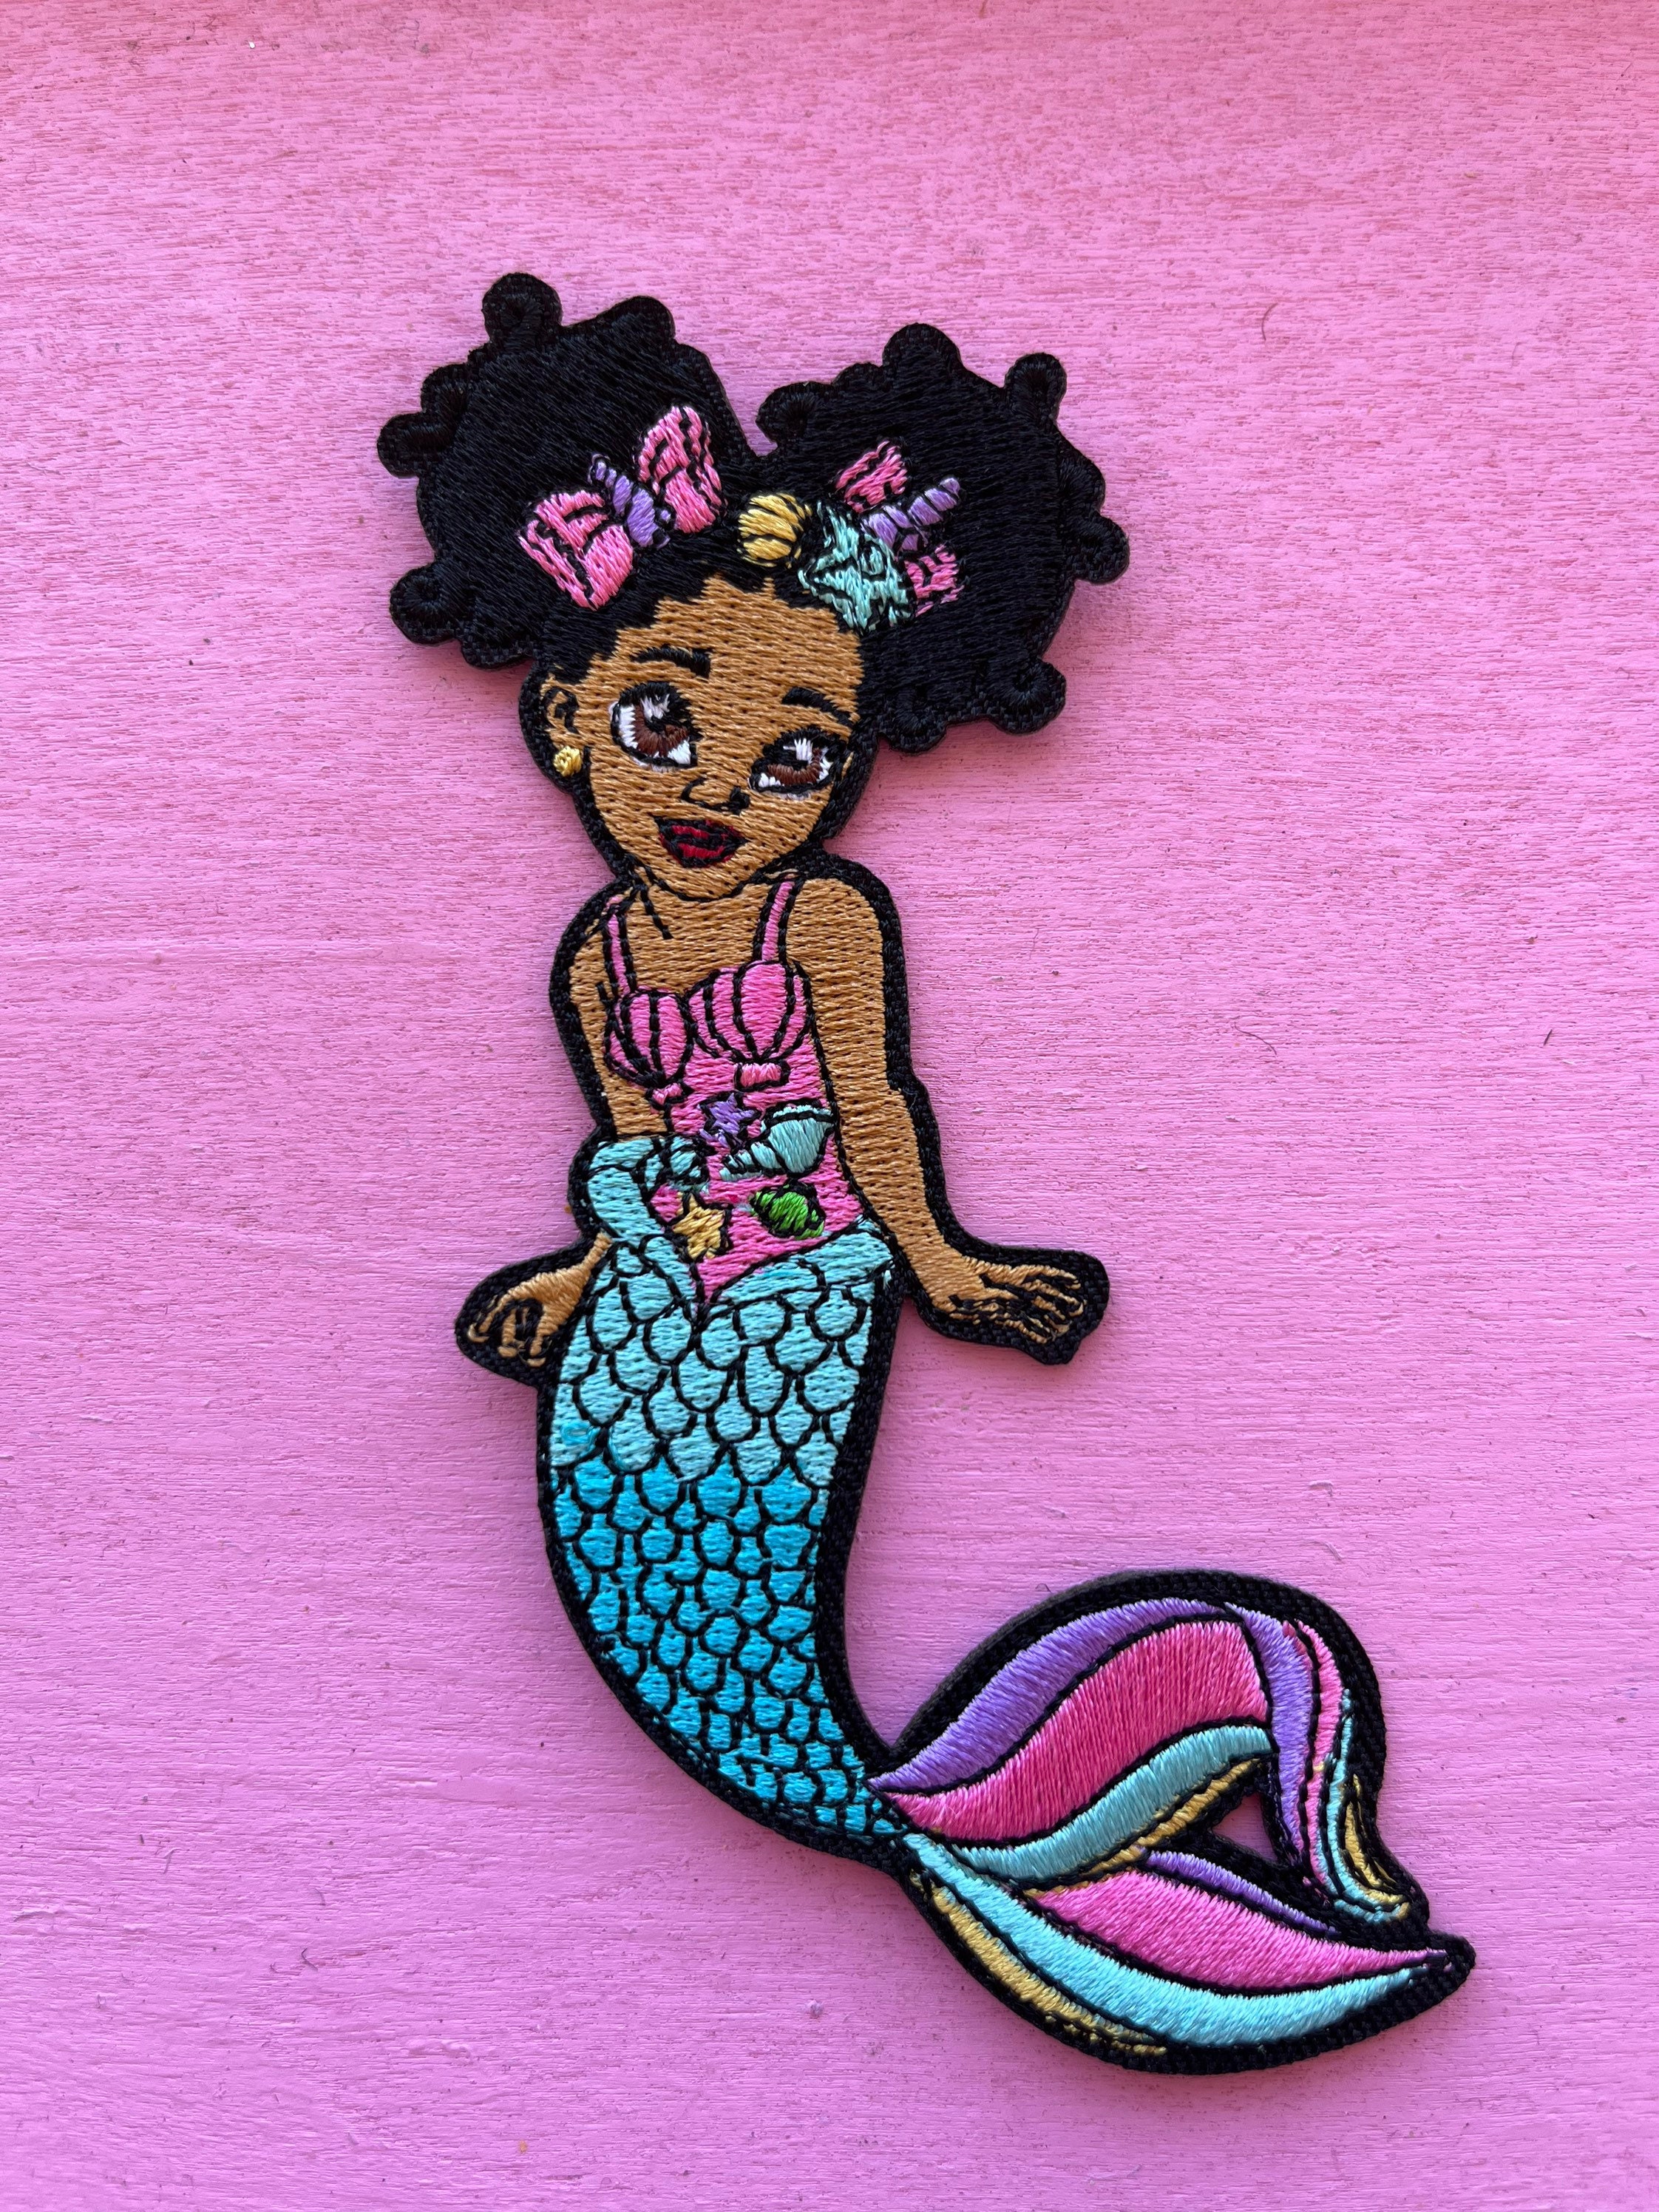 Mermaid Chenille Iron On Patch - Merbabe Chenille Iron on Patch